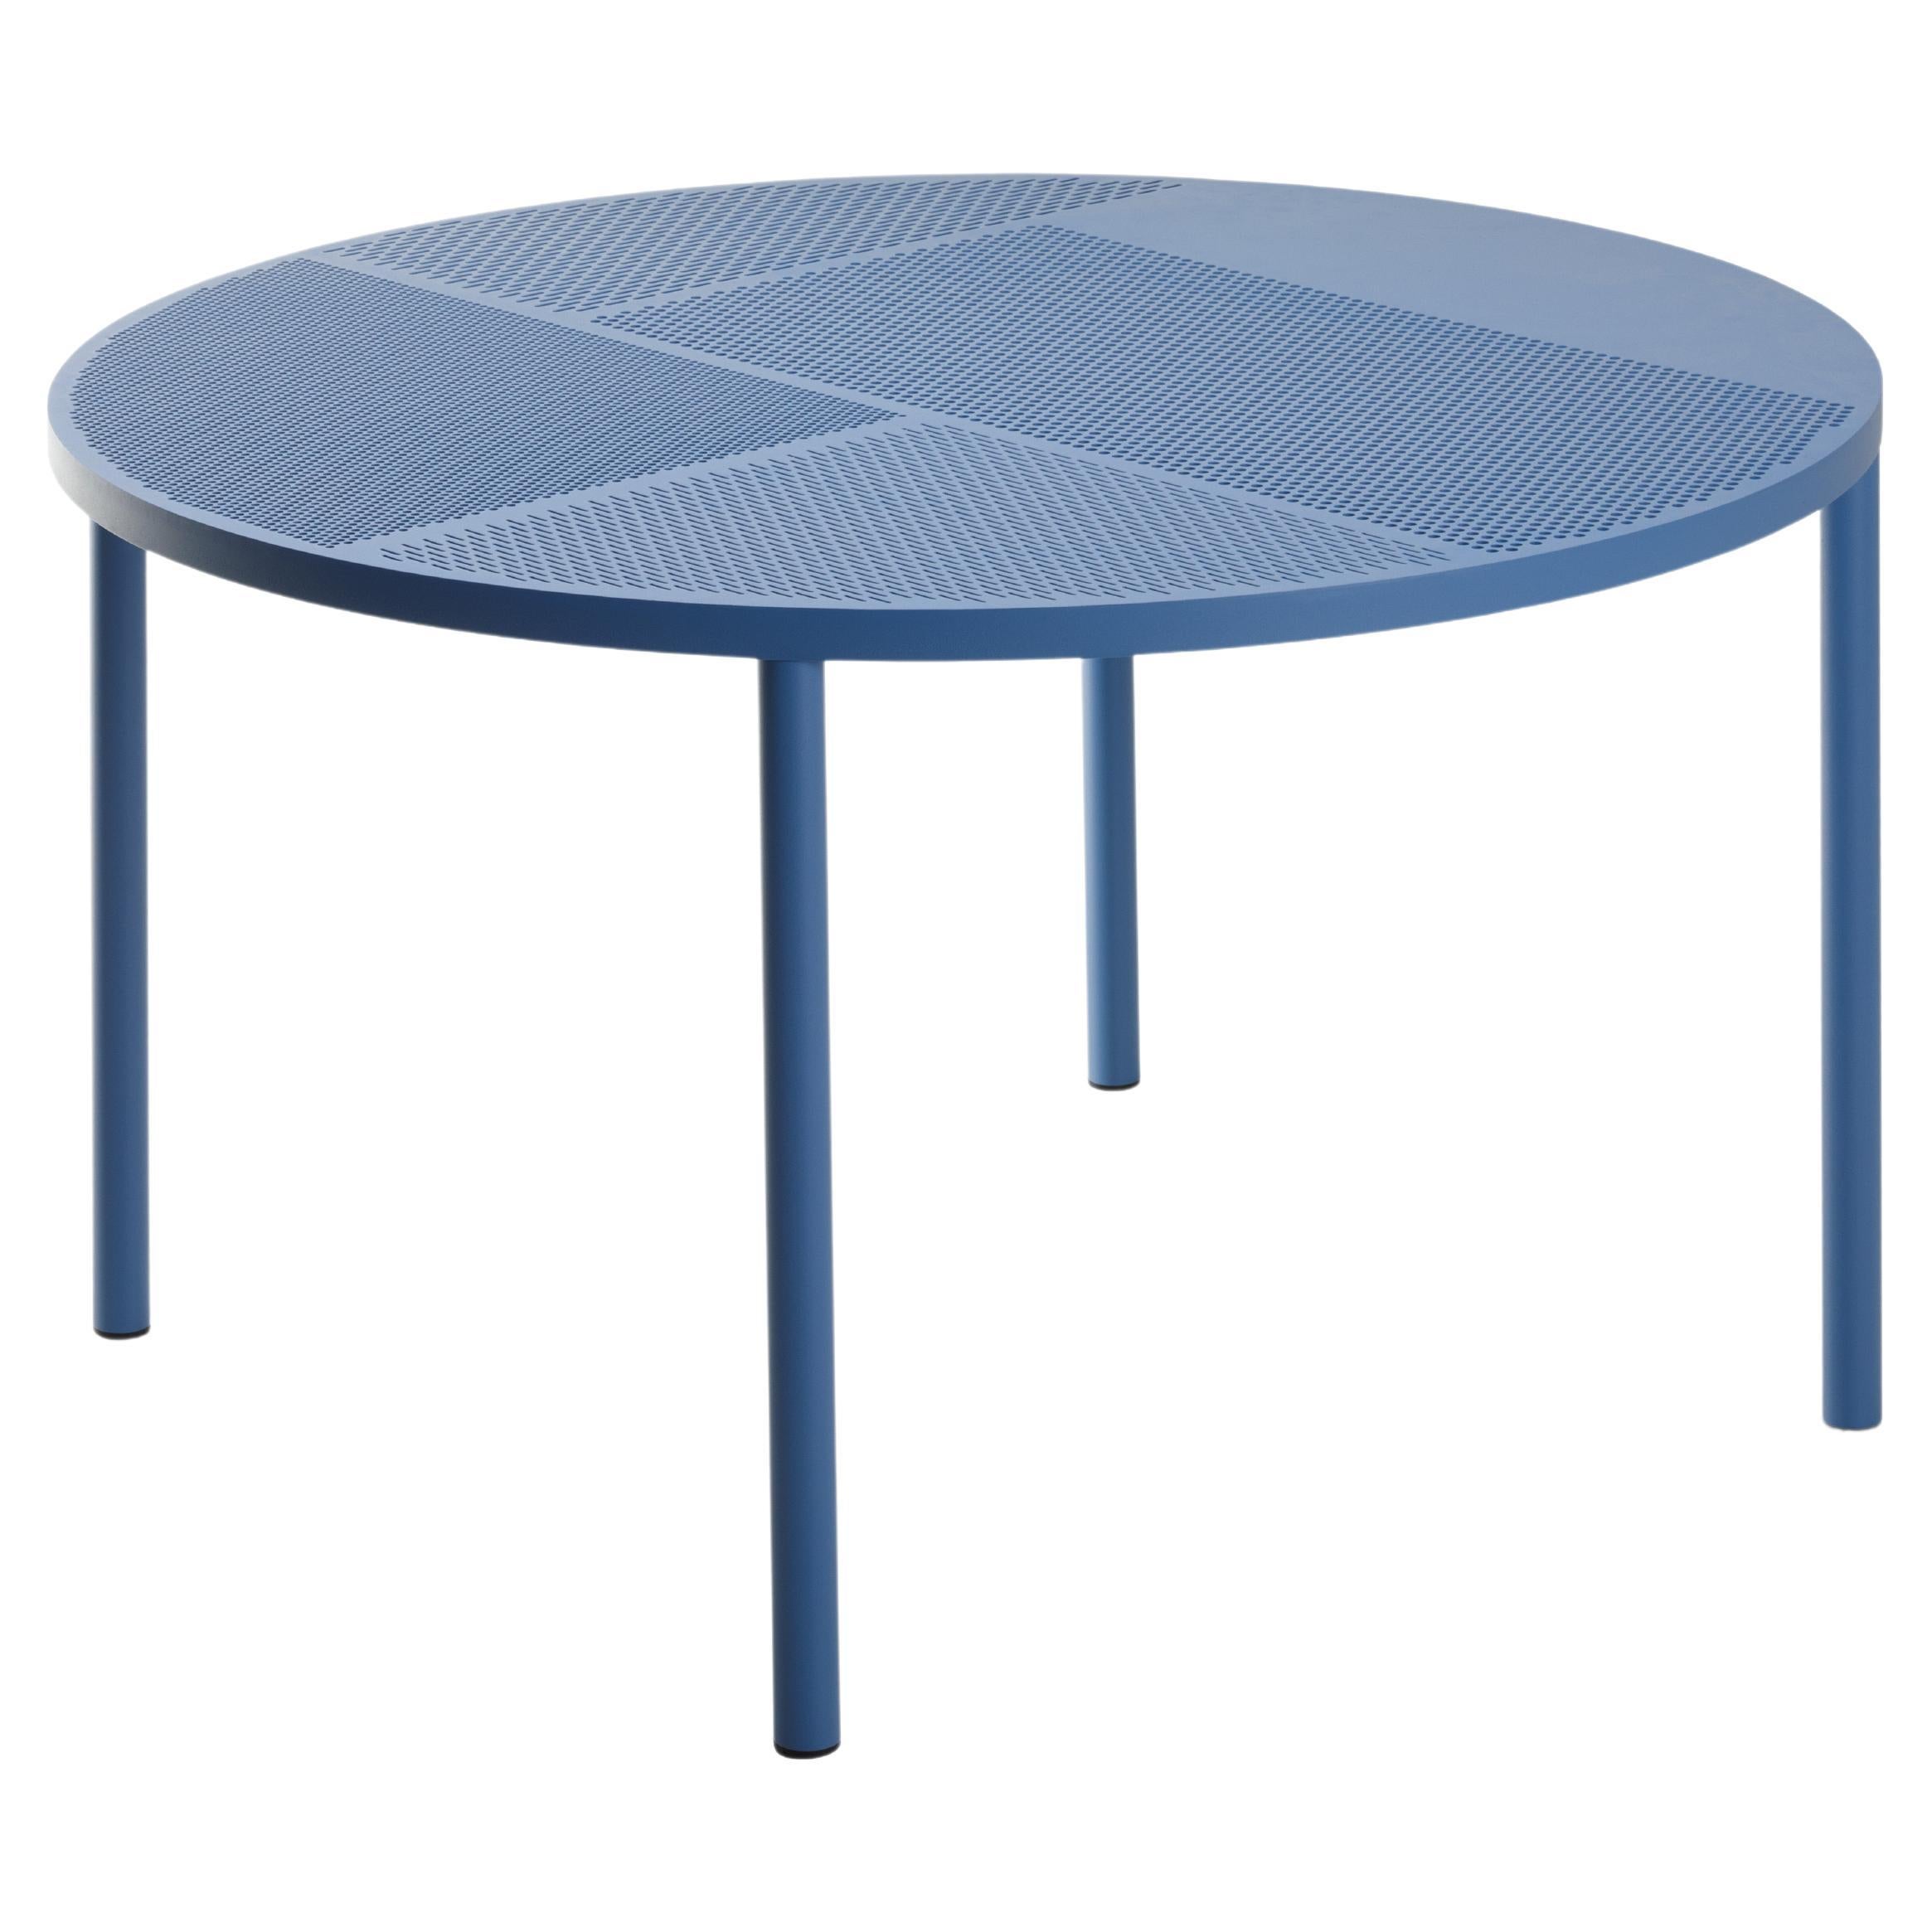 21st Century Modern Perforated Steel Round Table for Outdoor Neo Made in Italy For Sale